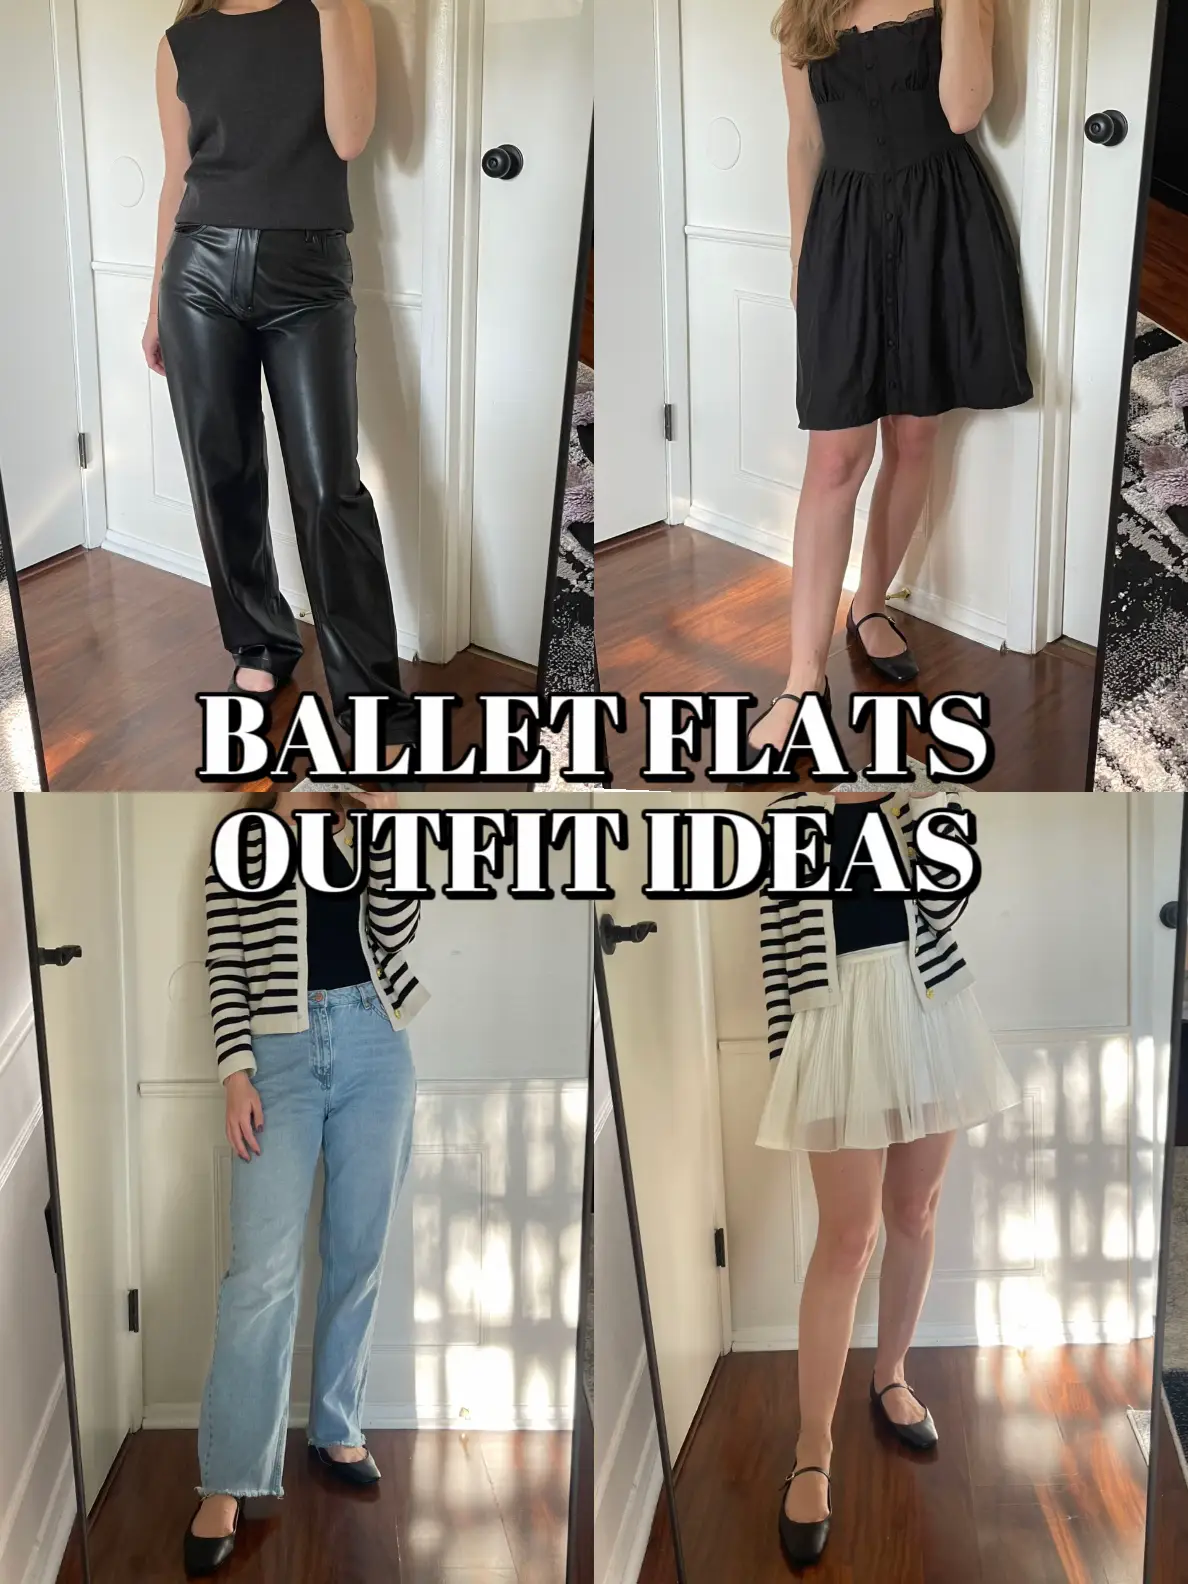 Old-money outfits with Zara ballet flats 🩰